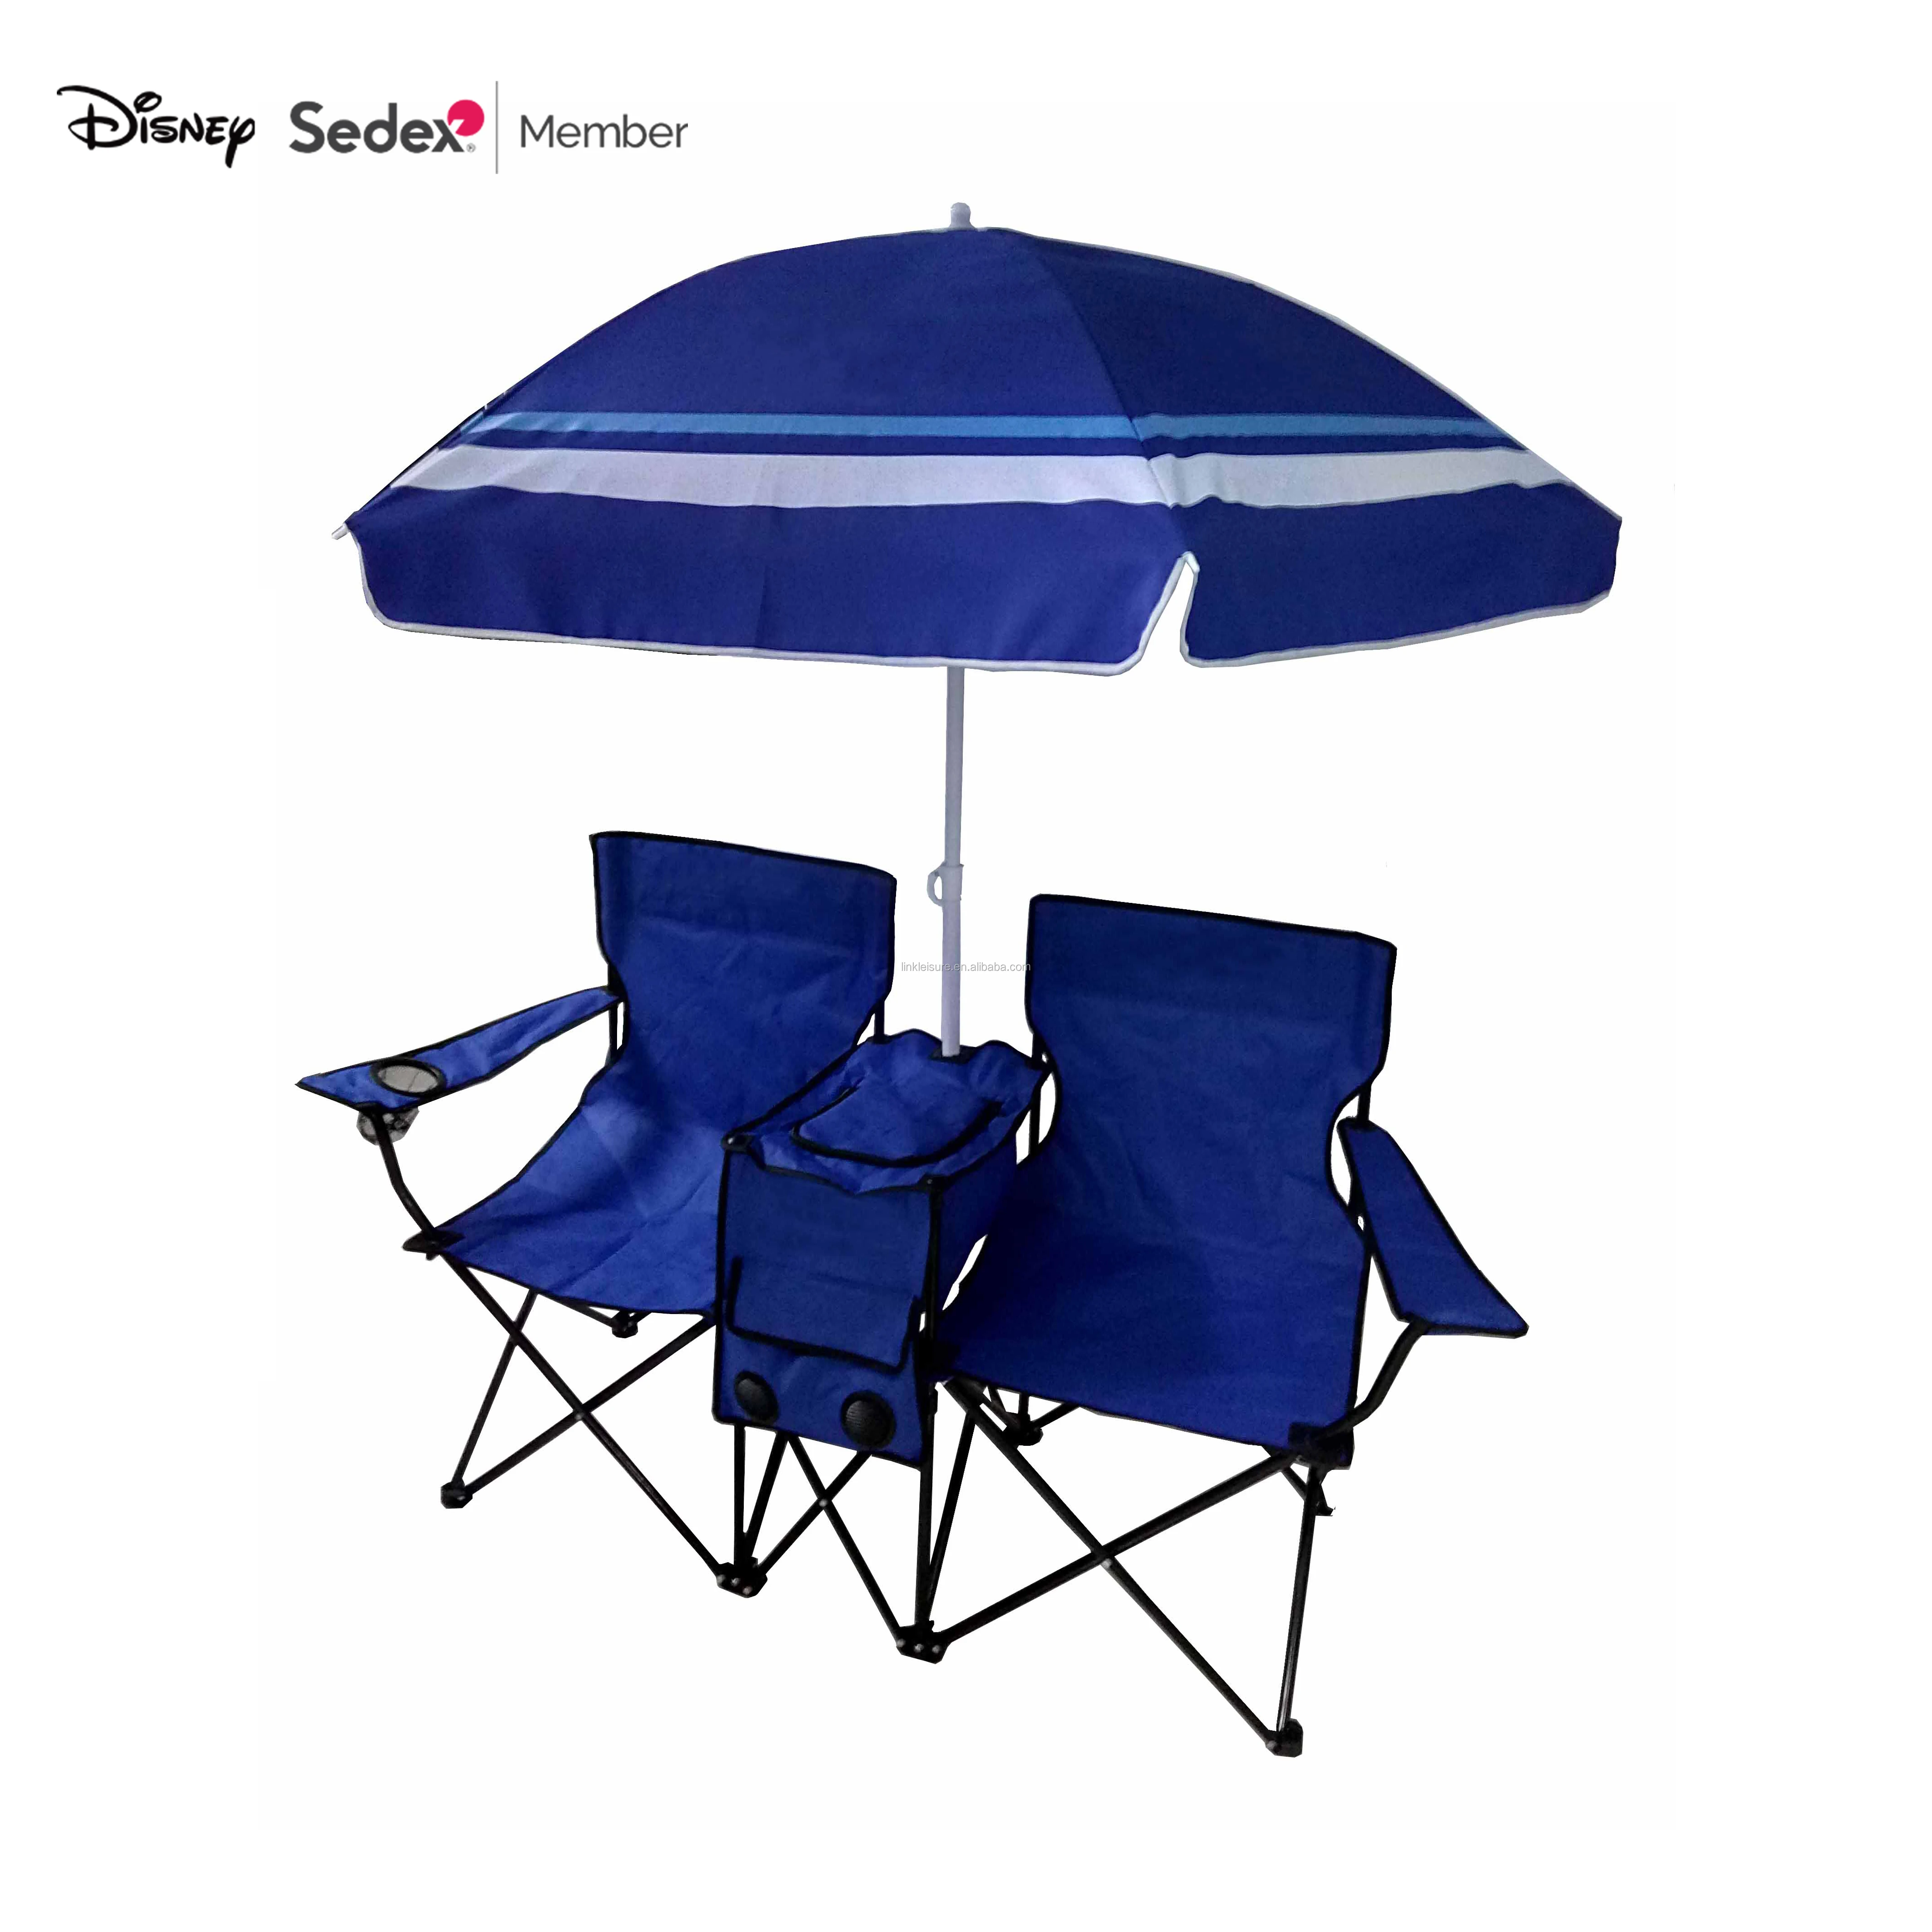 New Picnic Umbrella Chair Folding 2 Seat w/ Beverage Holder Cooler Beach Camping 